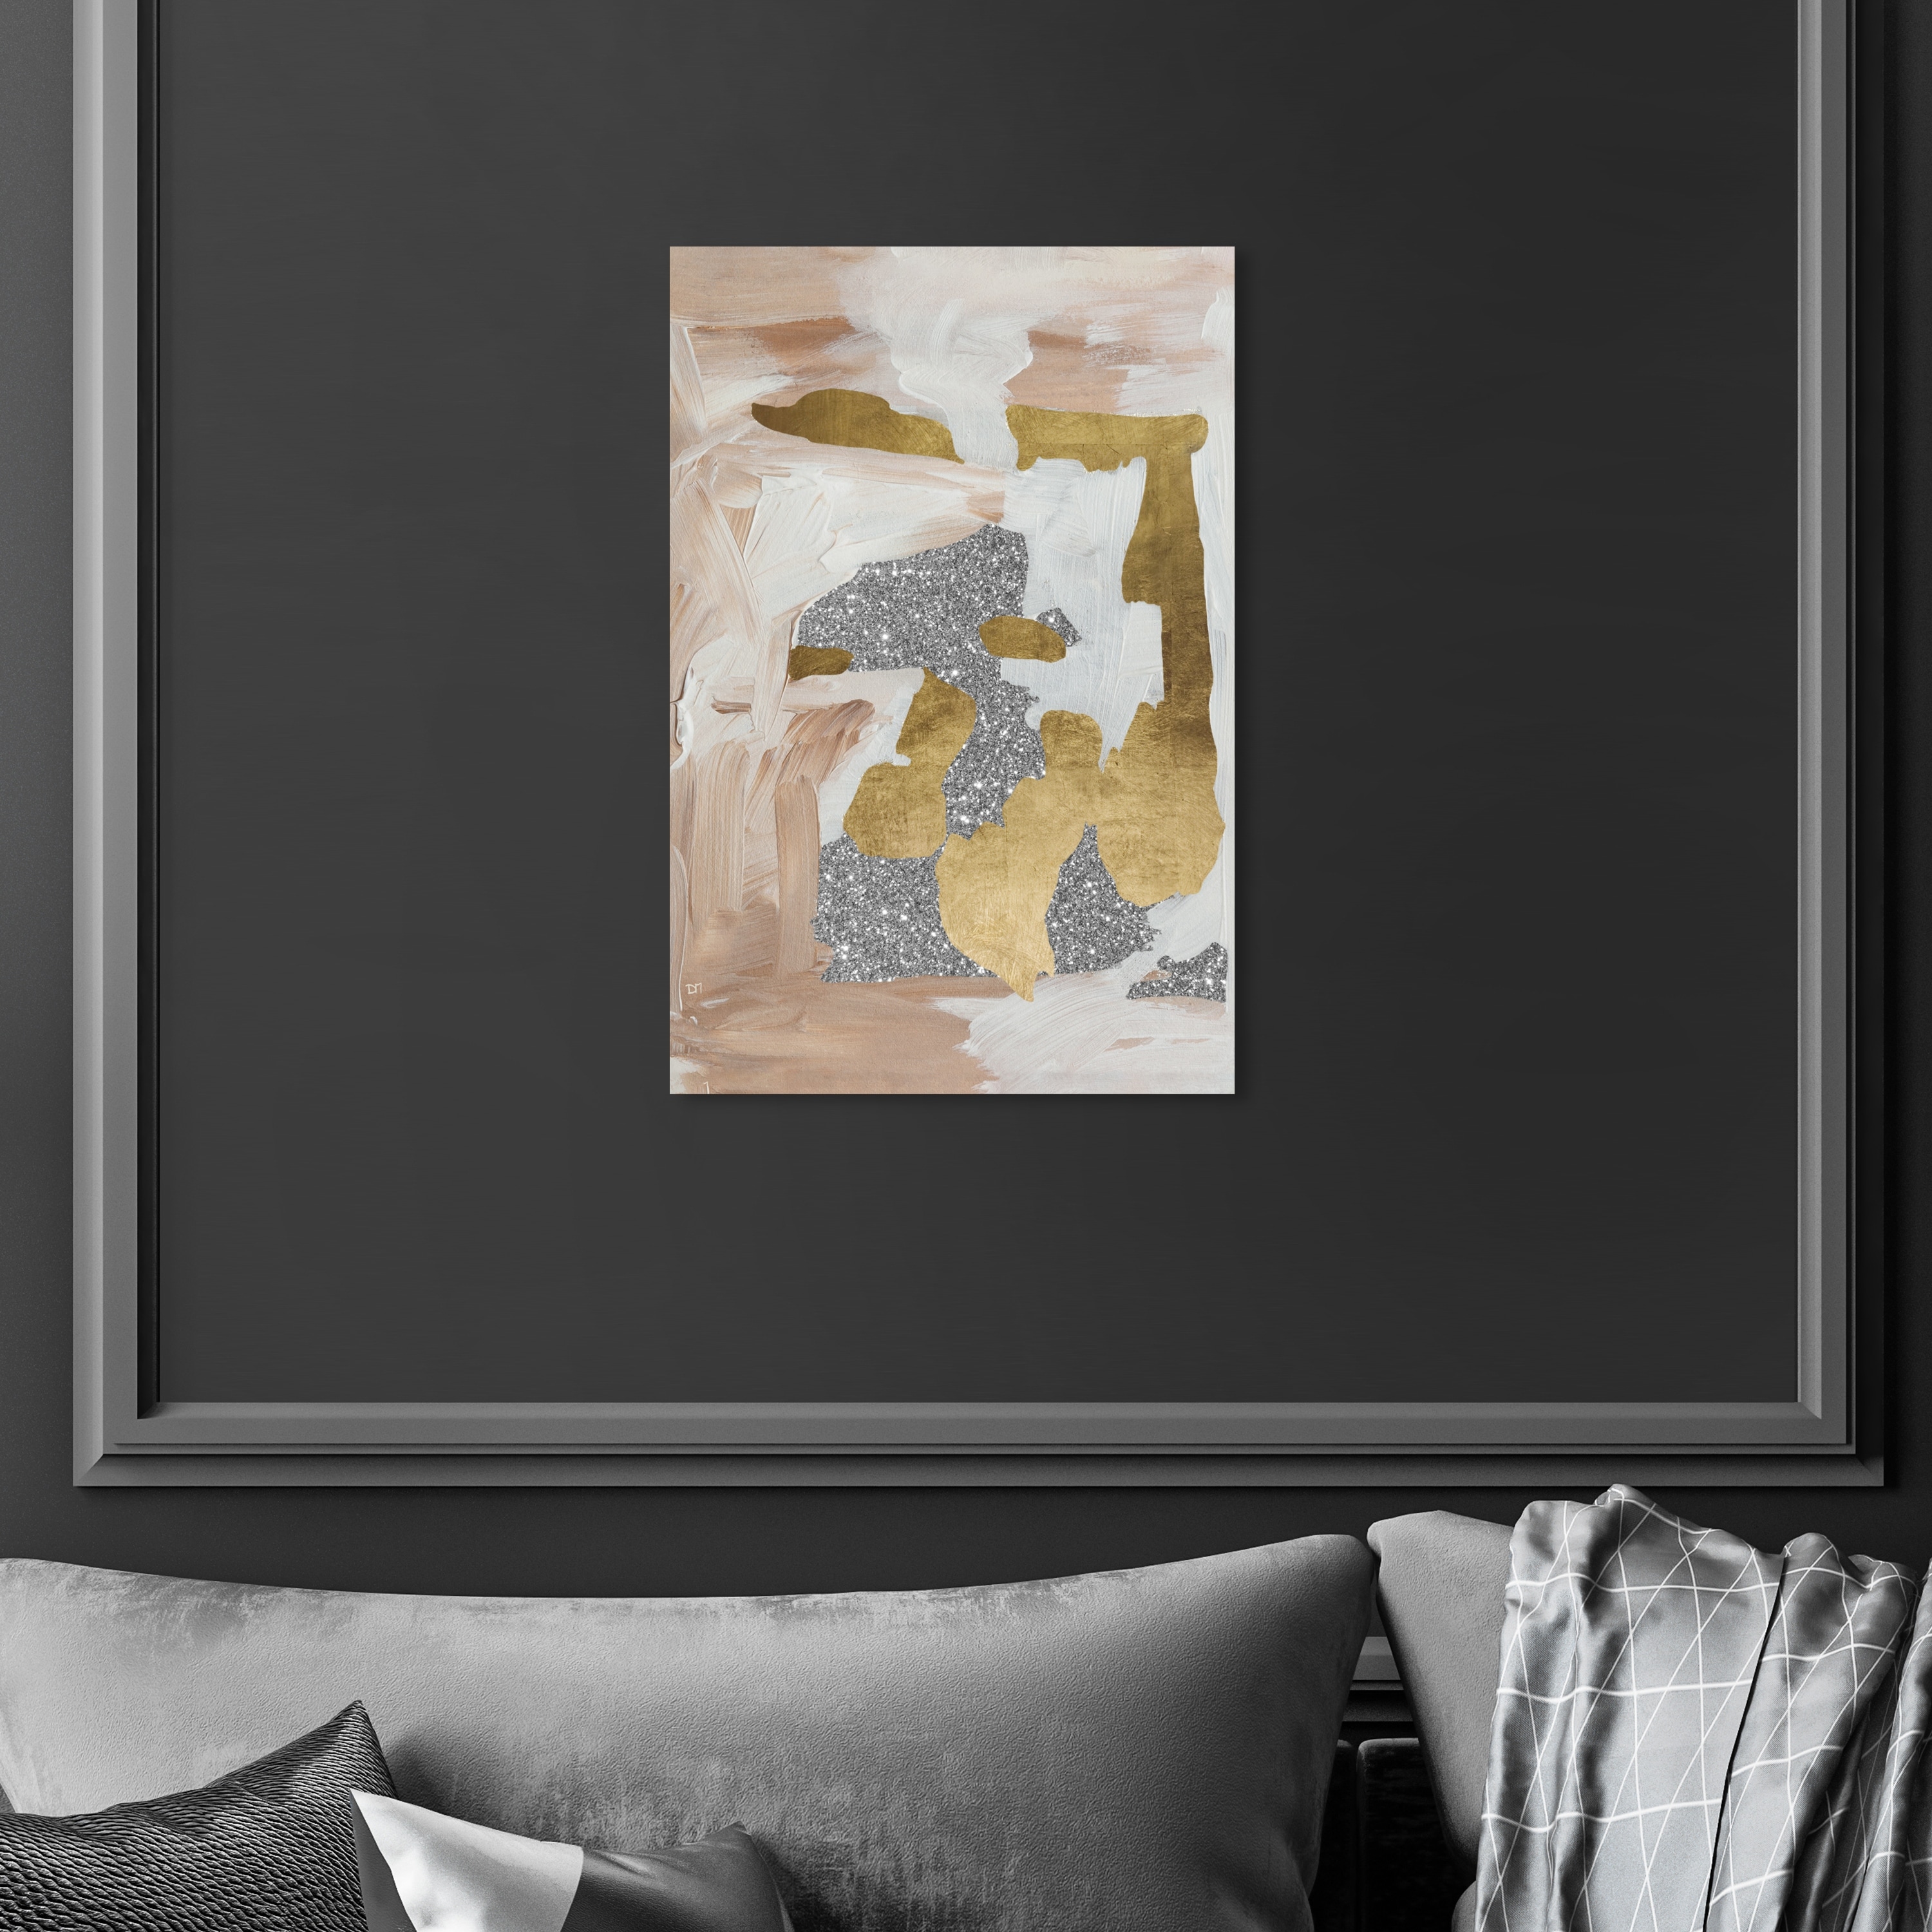 Oliver Gal 'Champagne Glitz' Abstract Wall Art Canvas Print Paint Pink,  Gold Bed Bath  Beyond 32479132